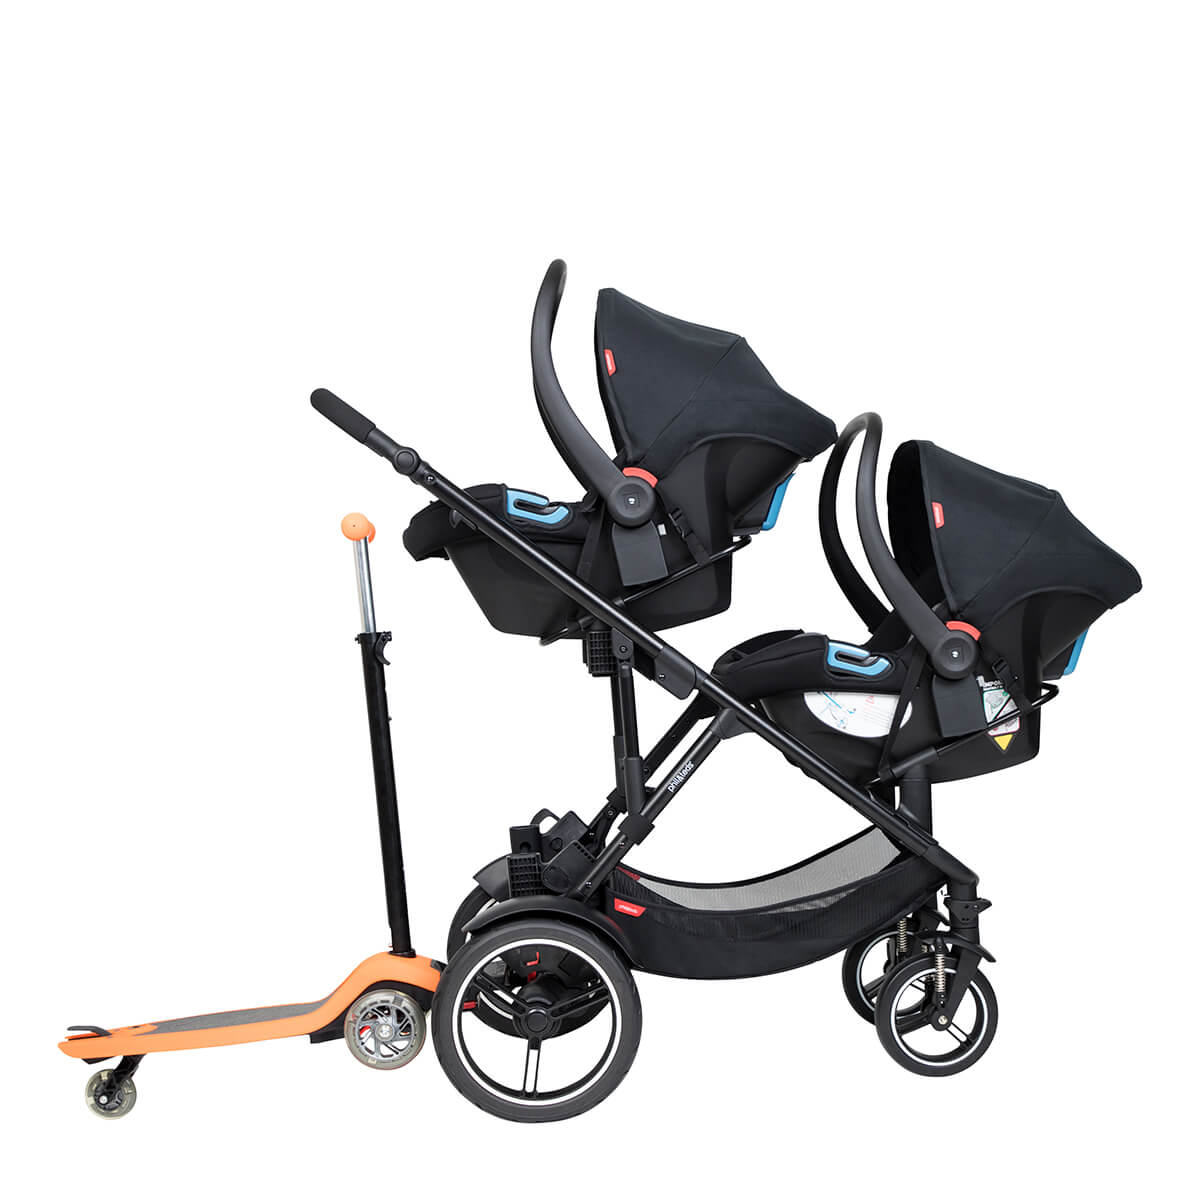 https://cdn.accentuate.io/7323499495512/19272835367000/philteds-voyager-buggy-with-double-travel-systems-and-freerider-stroller-board-in-the-rear-v1667185285800.jpg?1200x1200